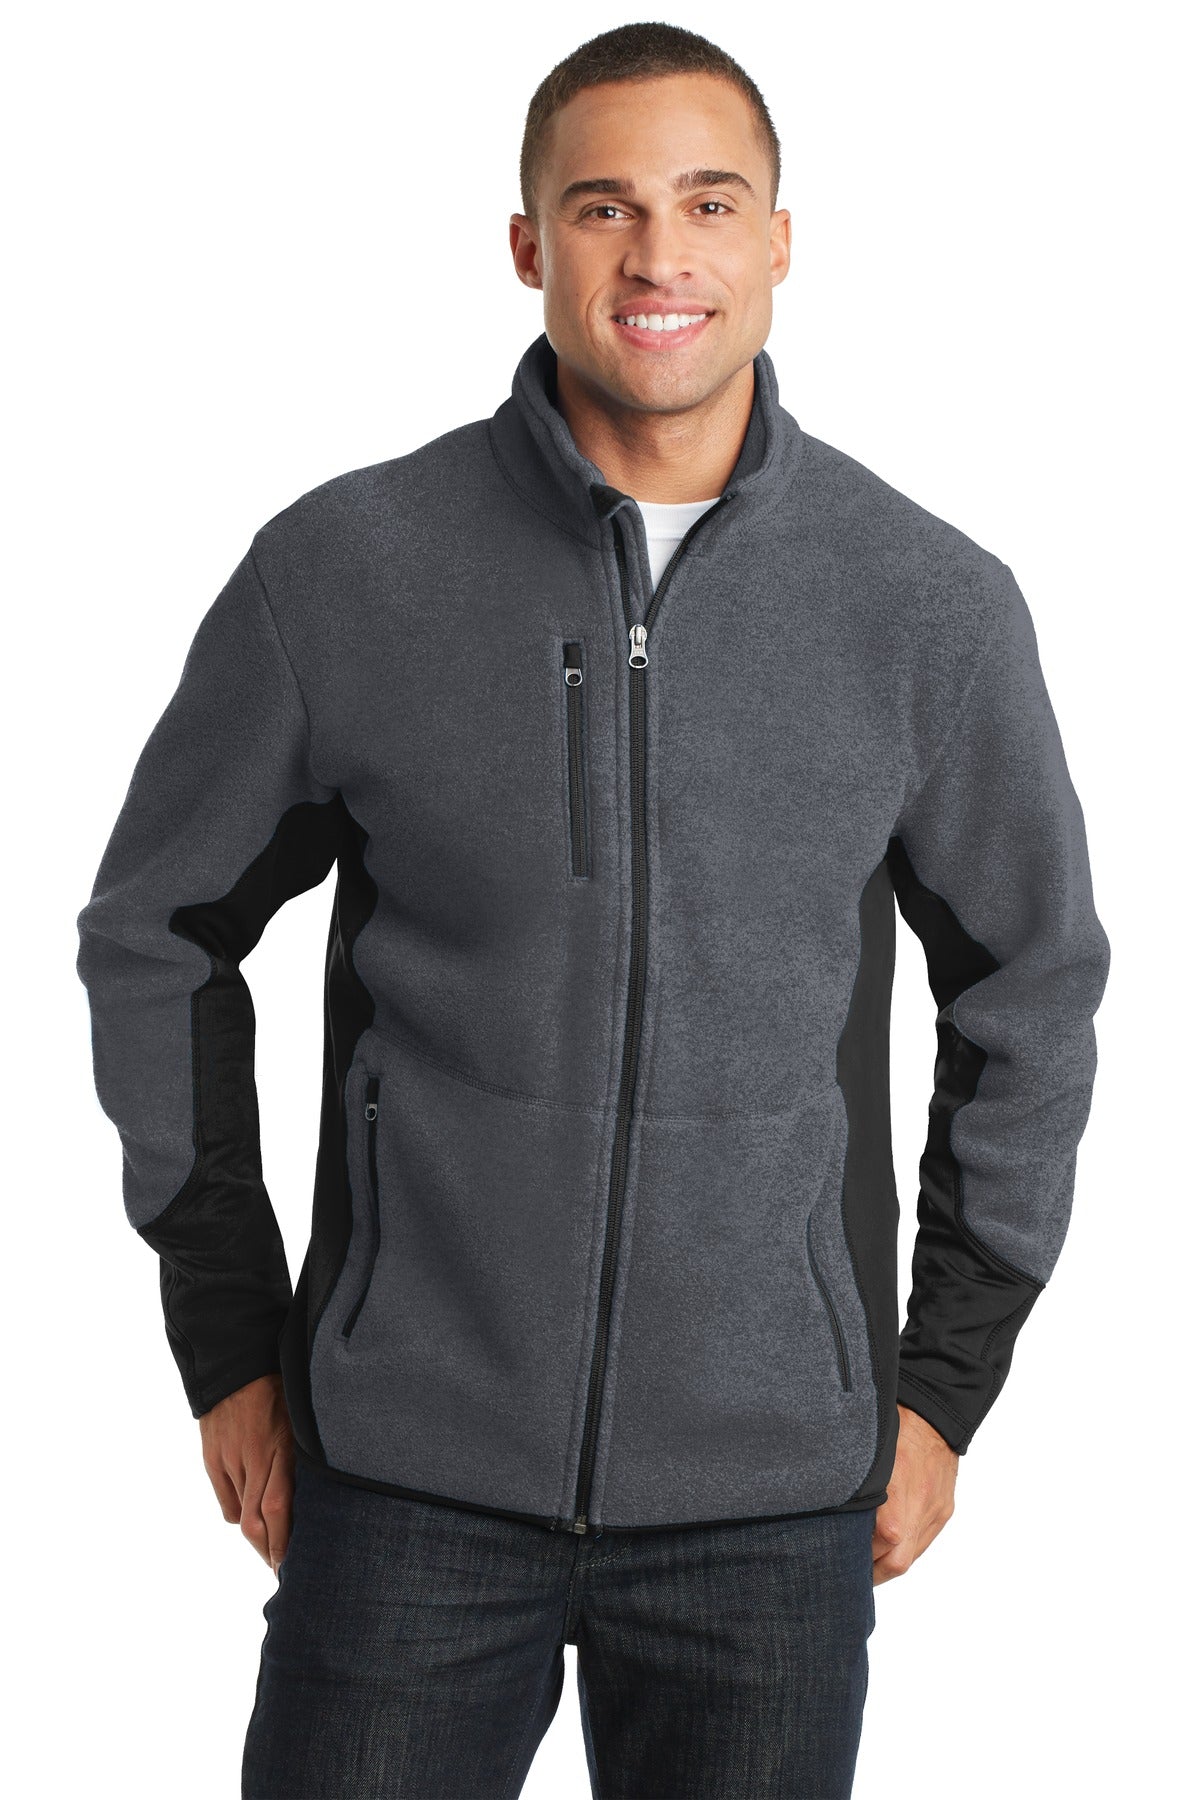 Outerwear Charcoal Heather/ Black Port Authority